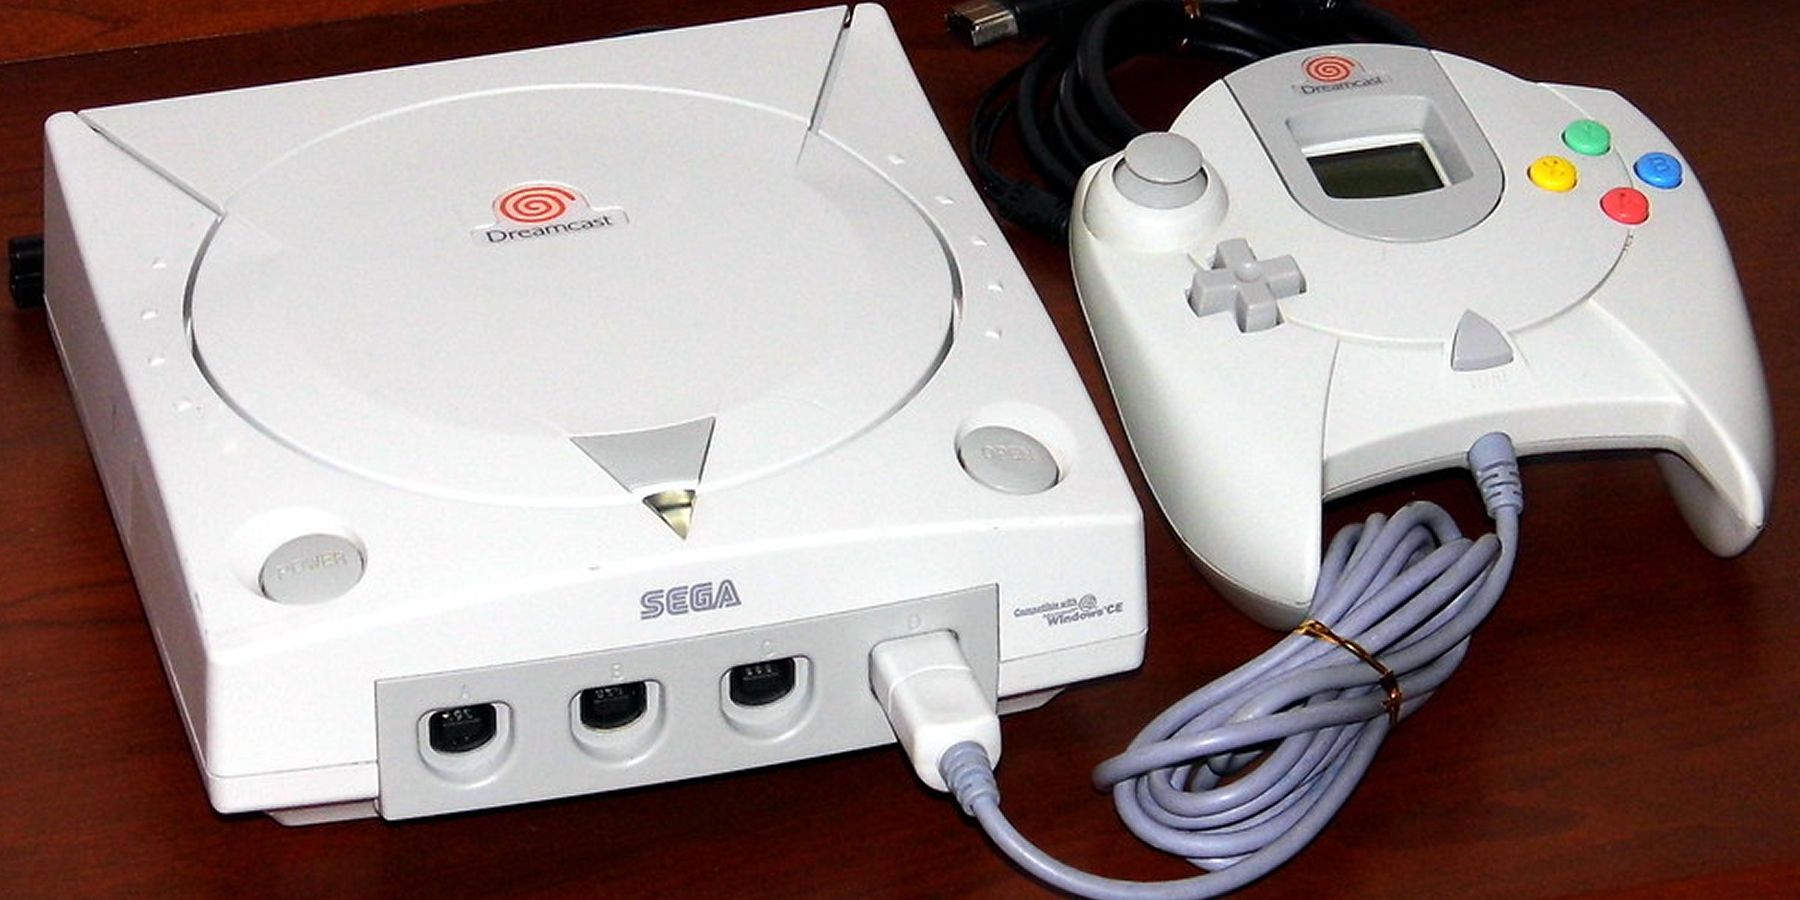 sega-dreamcast-on-table-with-wires